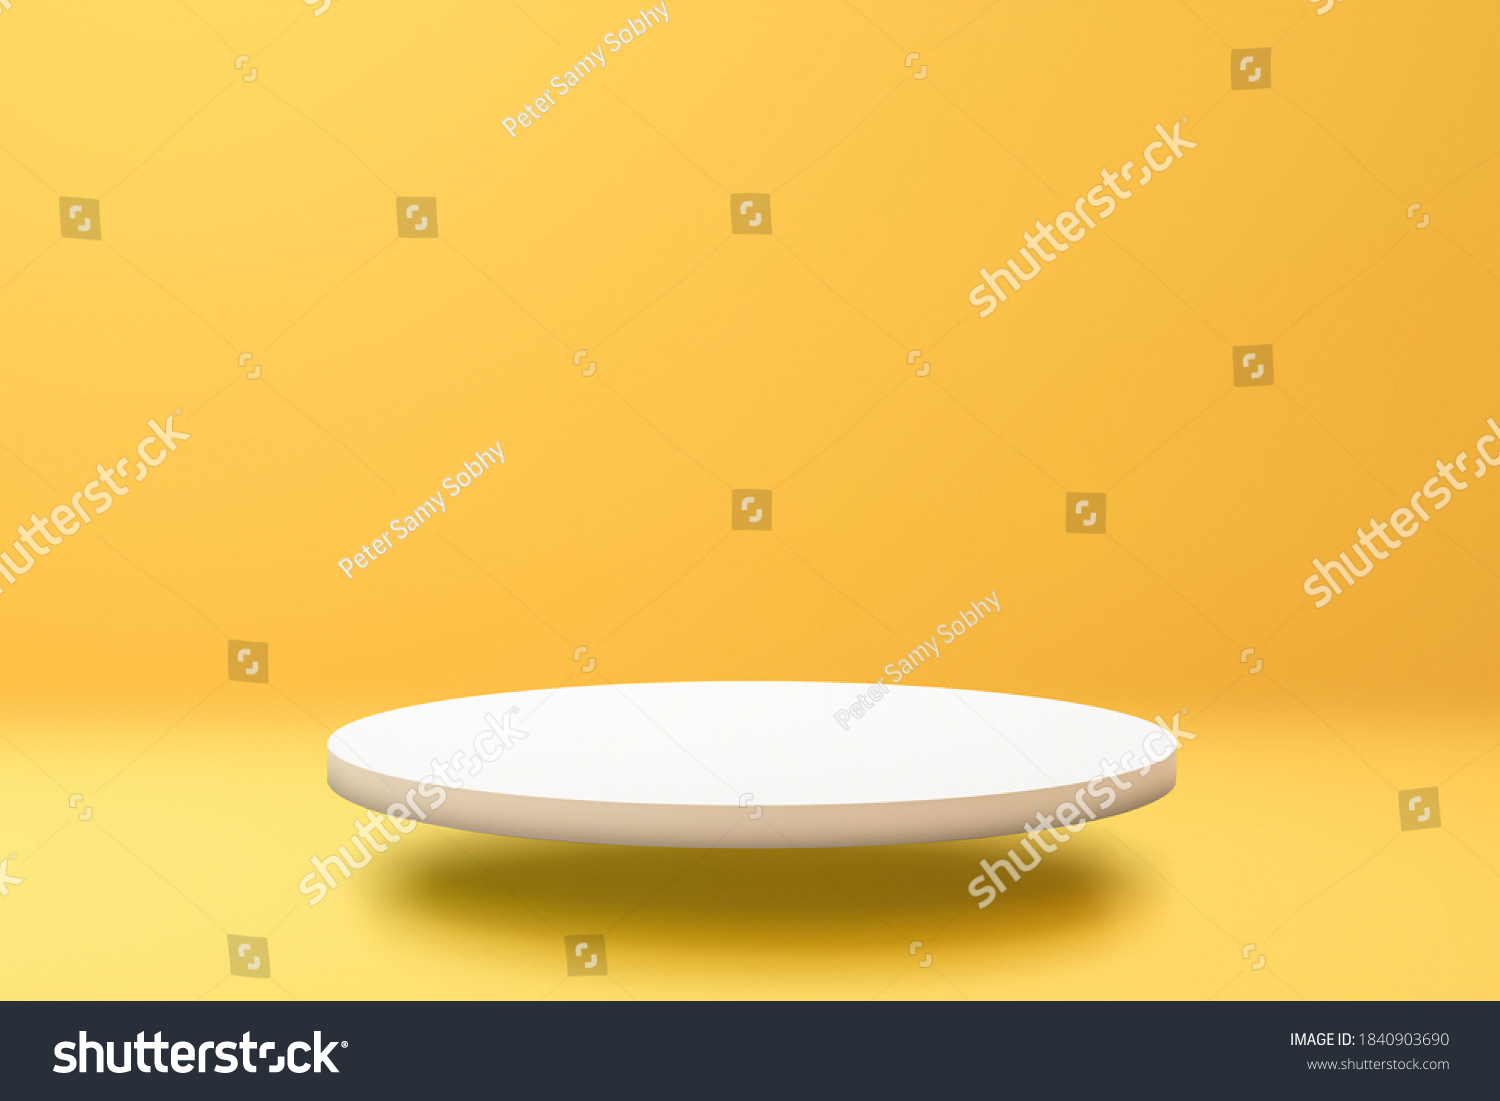 White podium shelf or empty pedestal display on vivid yellow summer background with minimal style. Blank stand for showing product. 3D rendering. #1840903690